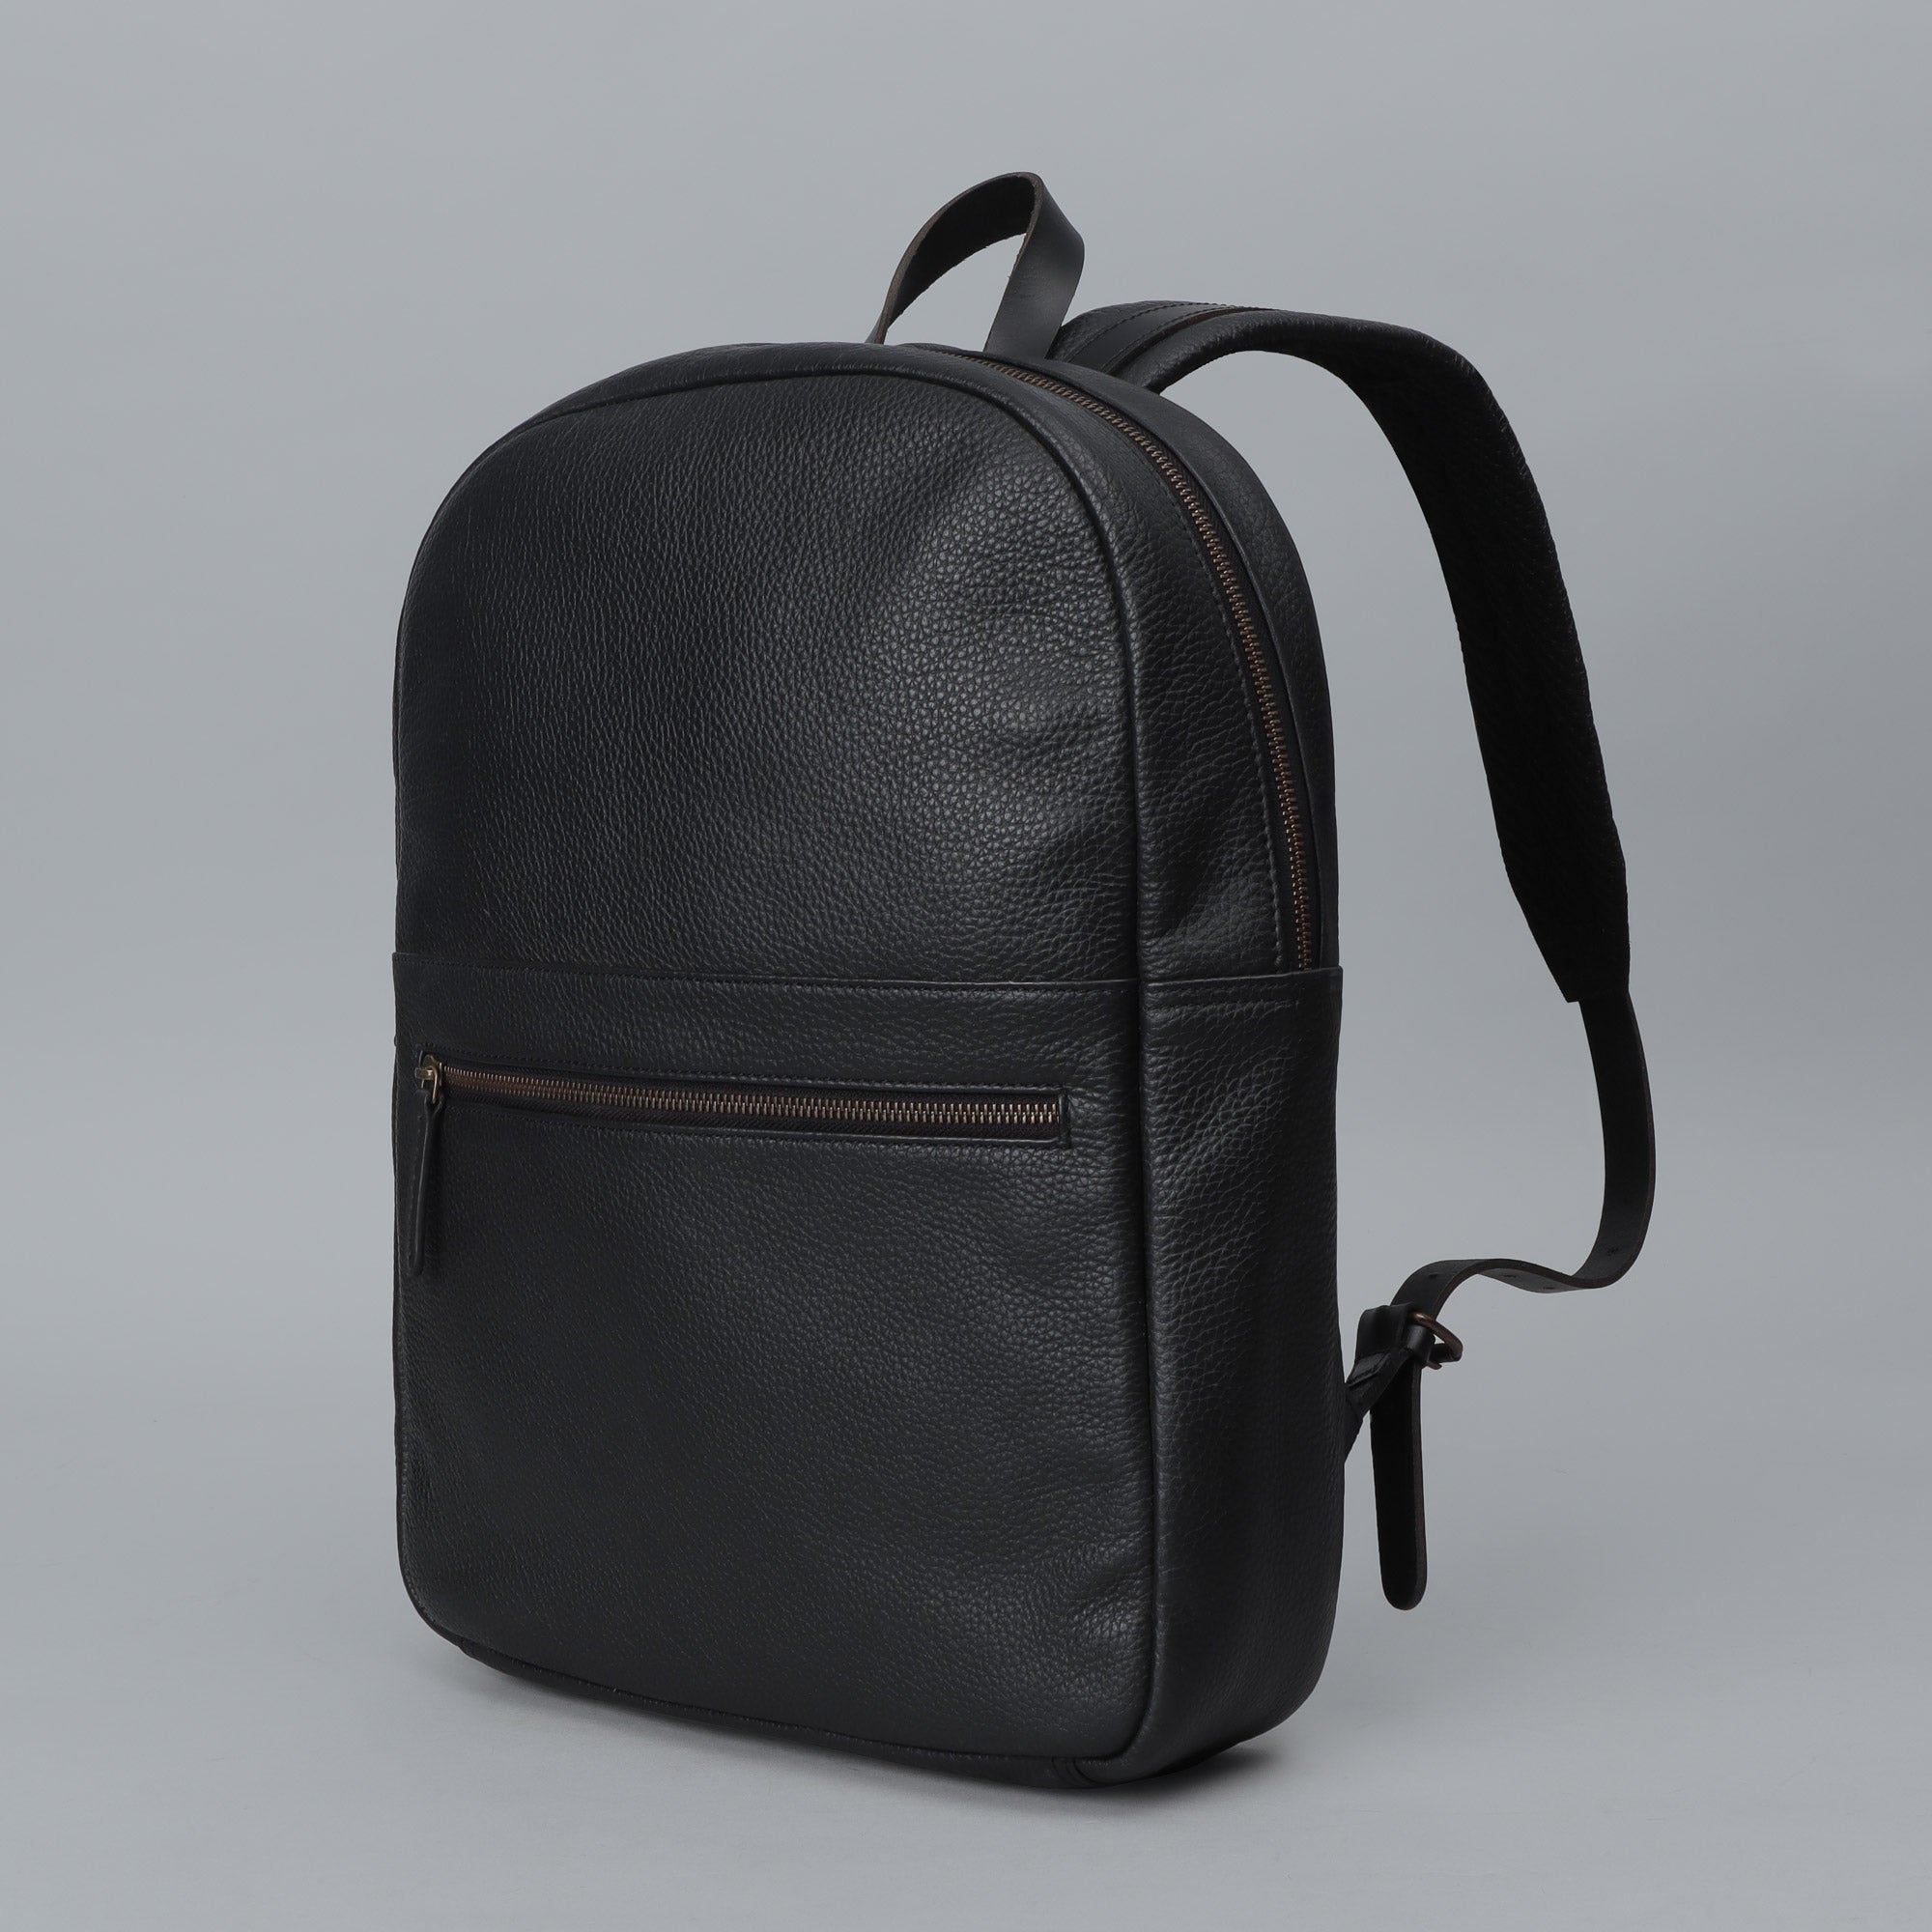 leather backpack for tavel